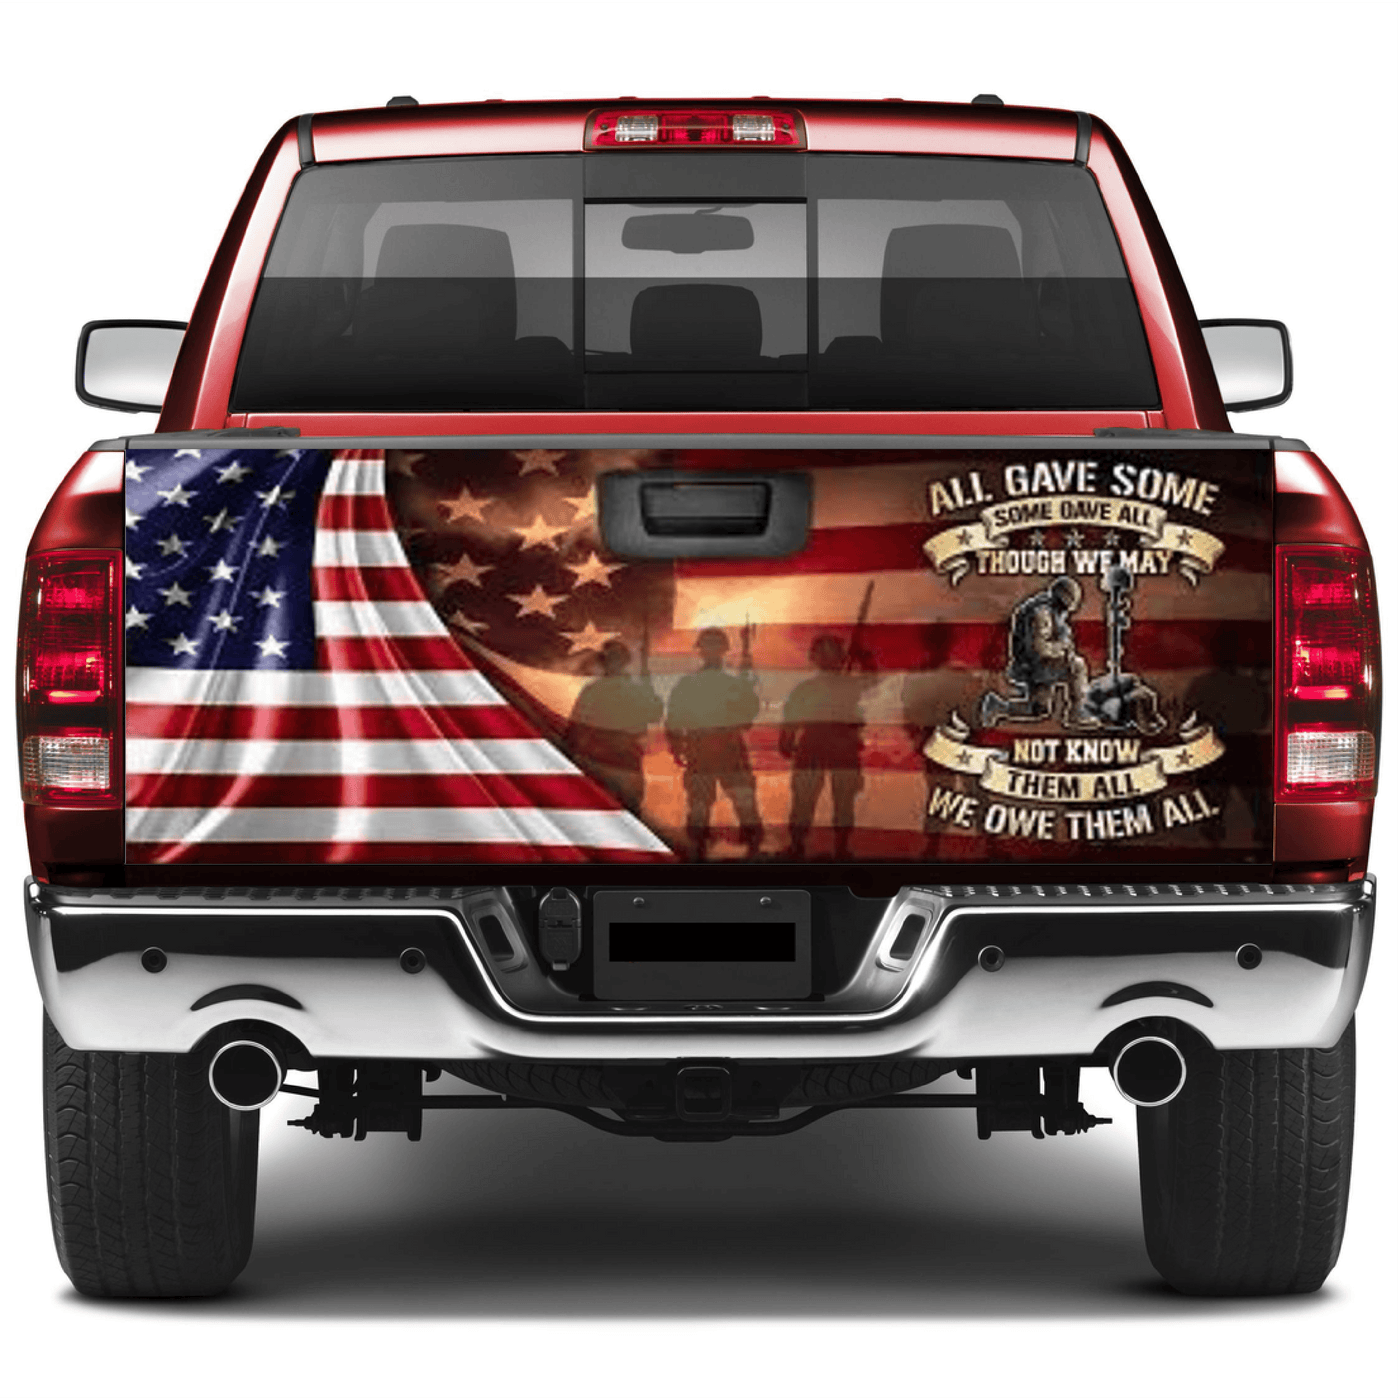 American Flag Tailgate Wrap Veteran, All Gave Some Some Gave All Wraps For Trucks Wrap Vinyl Car Decals SUV Sticker